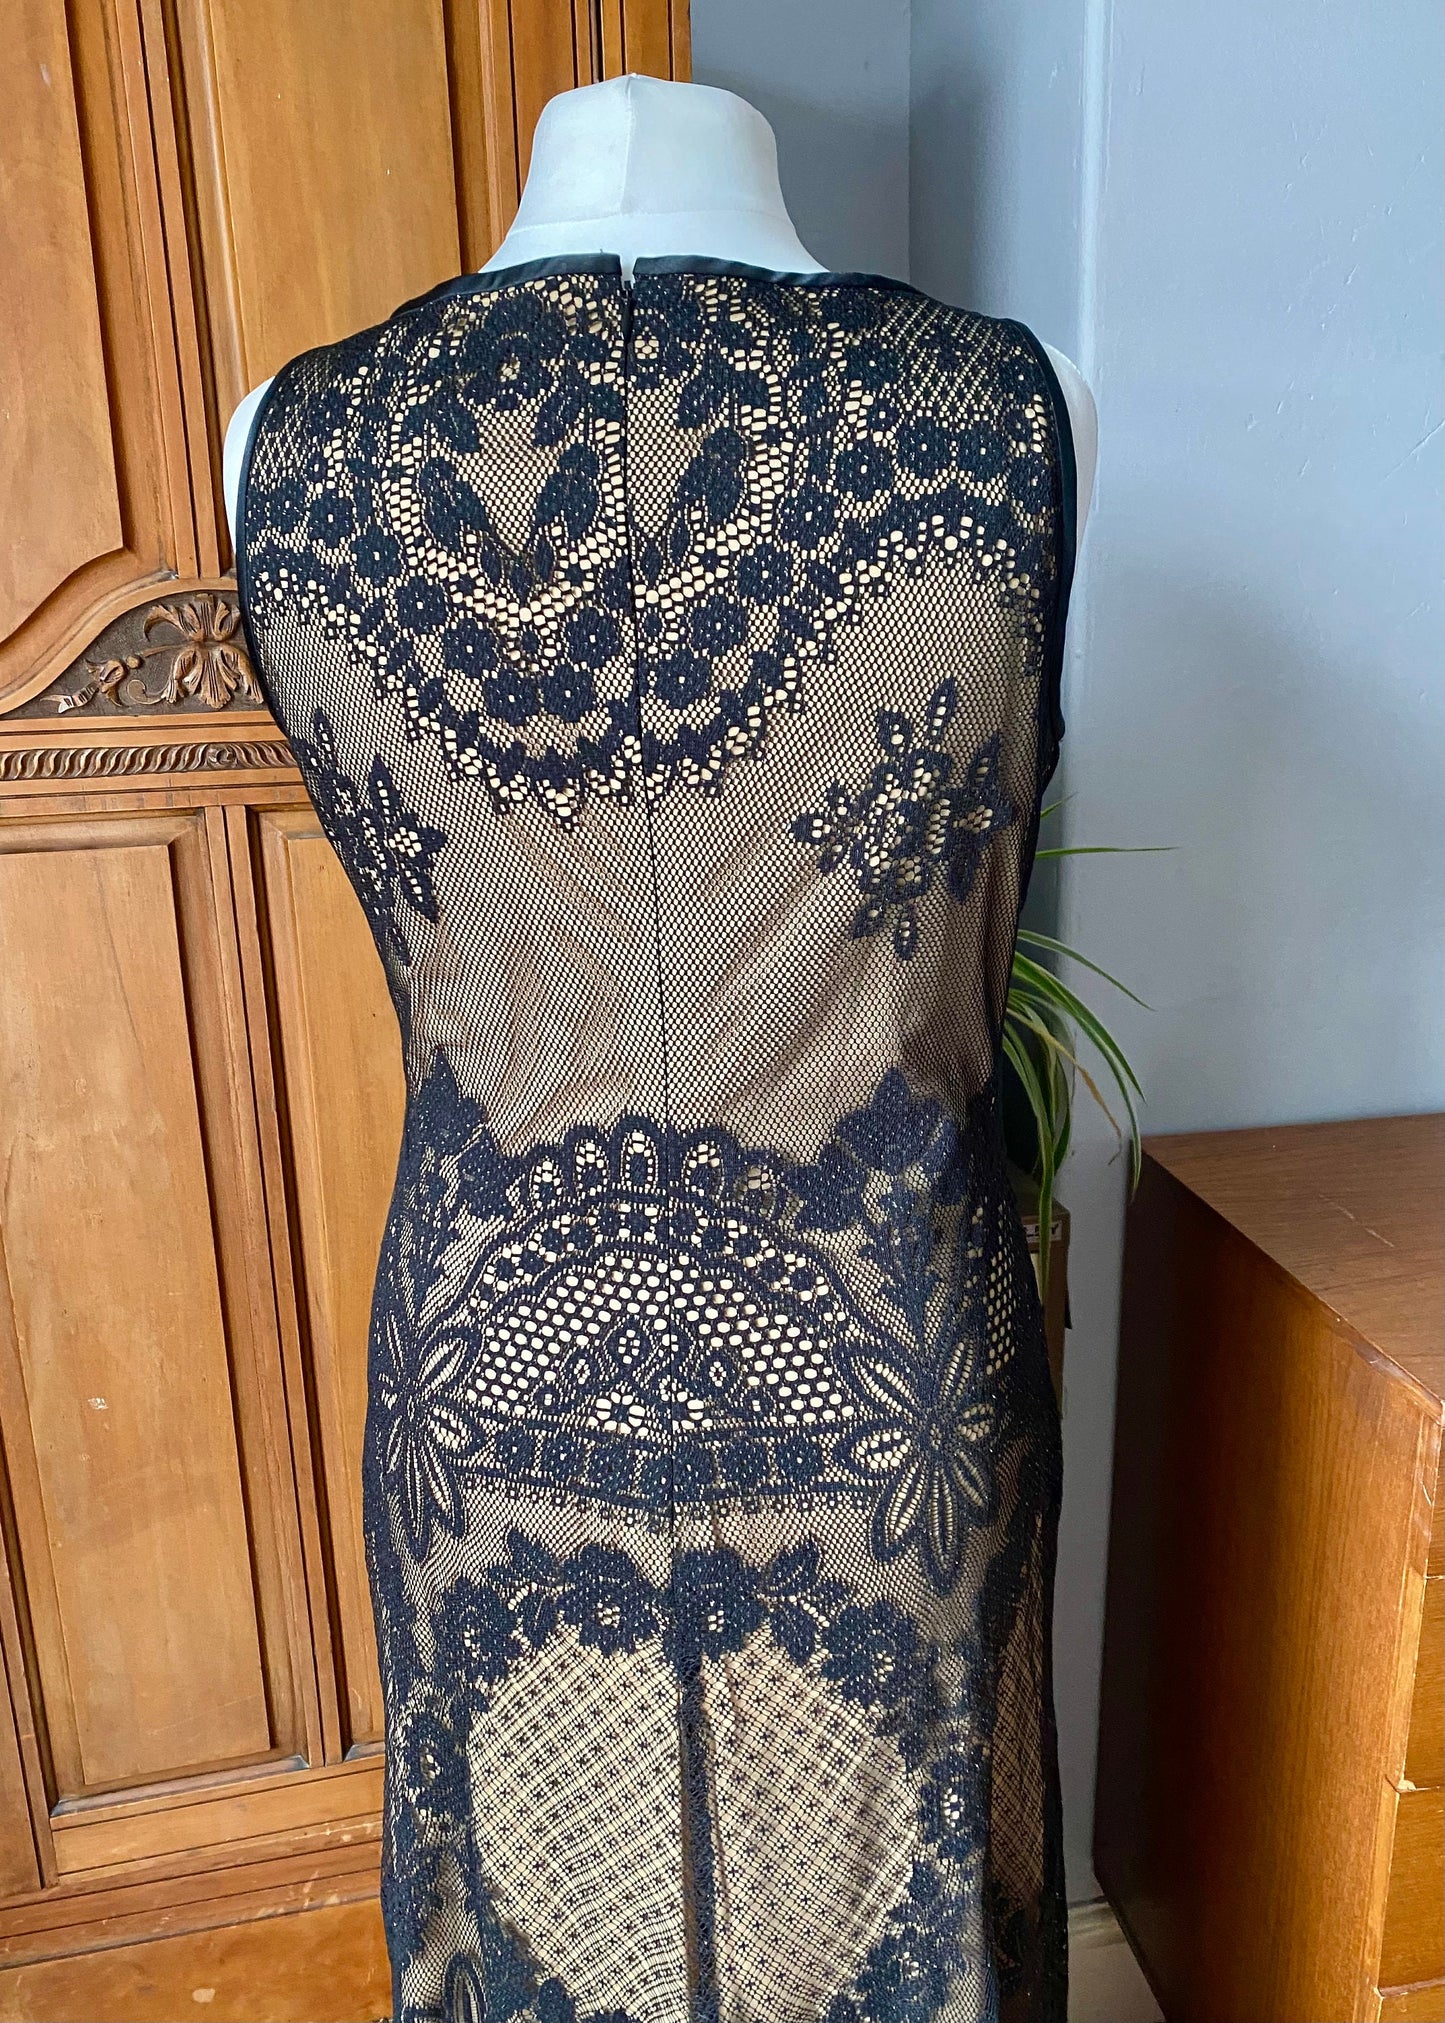 90s black lace dress. Vintage embroidered mesh maxi. Sleeveless, with satin trim and a gold lining. Approx U.K  size 14-16